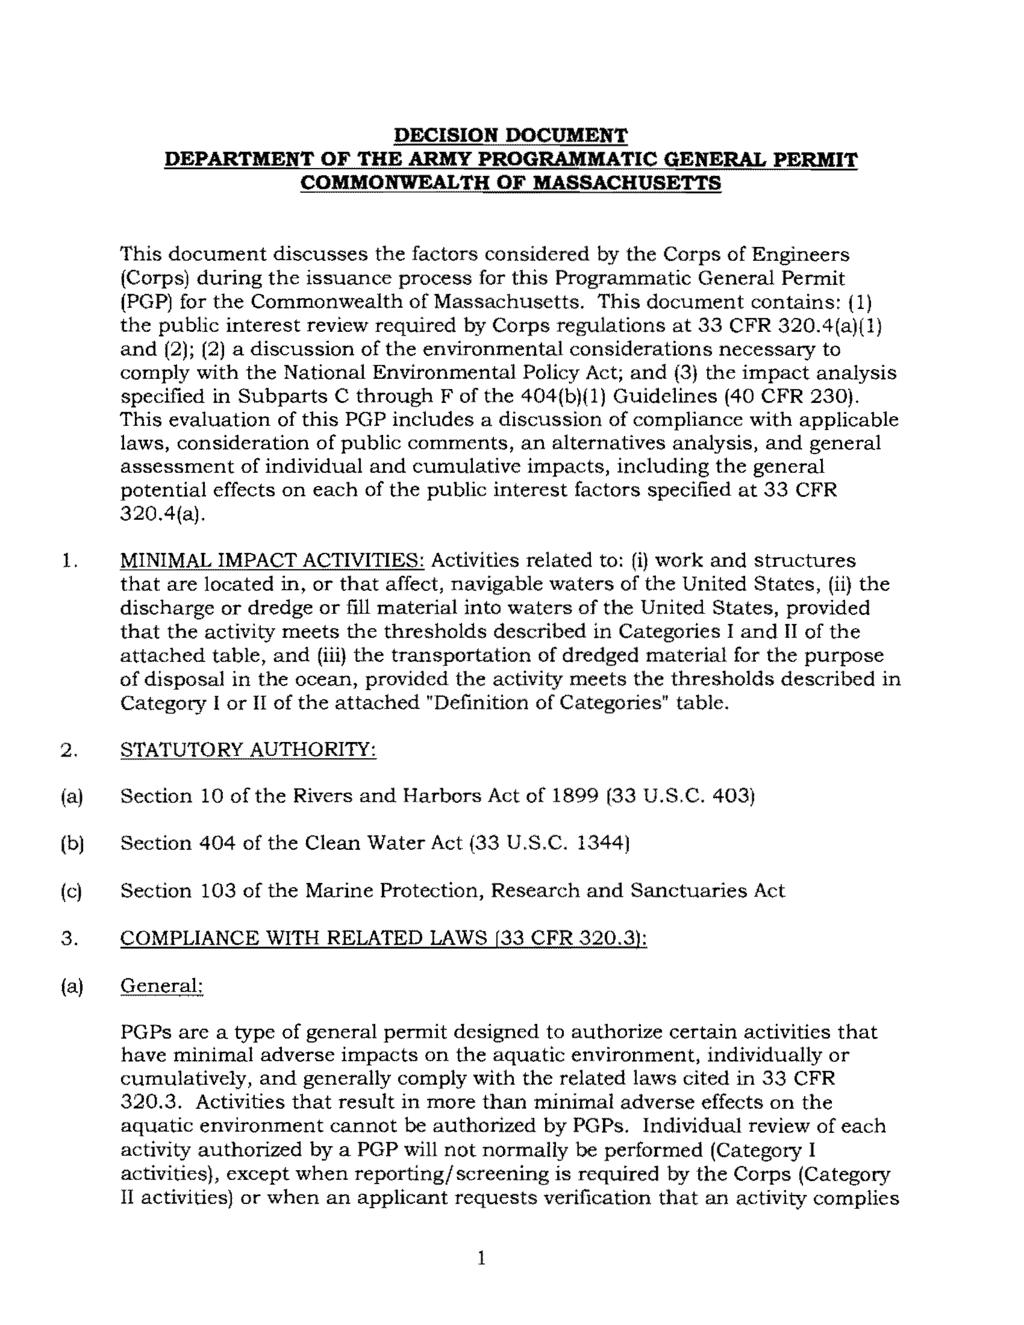 DECISION DOCUMENT DEPARTMENT OF THE ARMY PROGRAMMATIC GENERAL PERMIT COMMONWEALTH OF MASSACHUSETTS This document discusses the factors considered by the Corps of Engineers (Corps) during the issuance